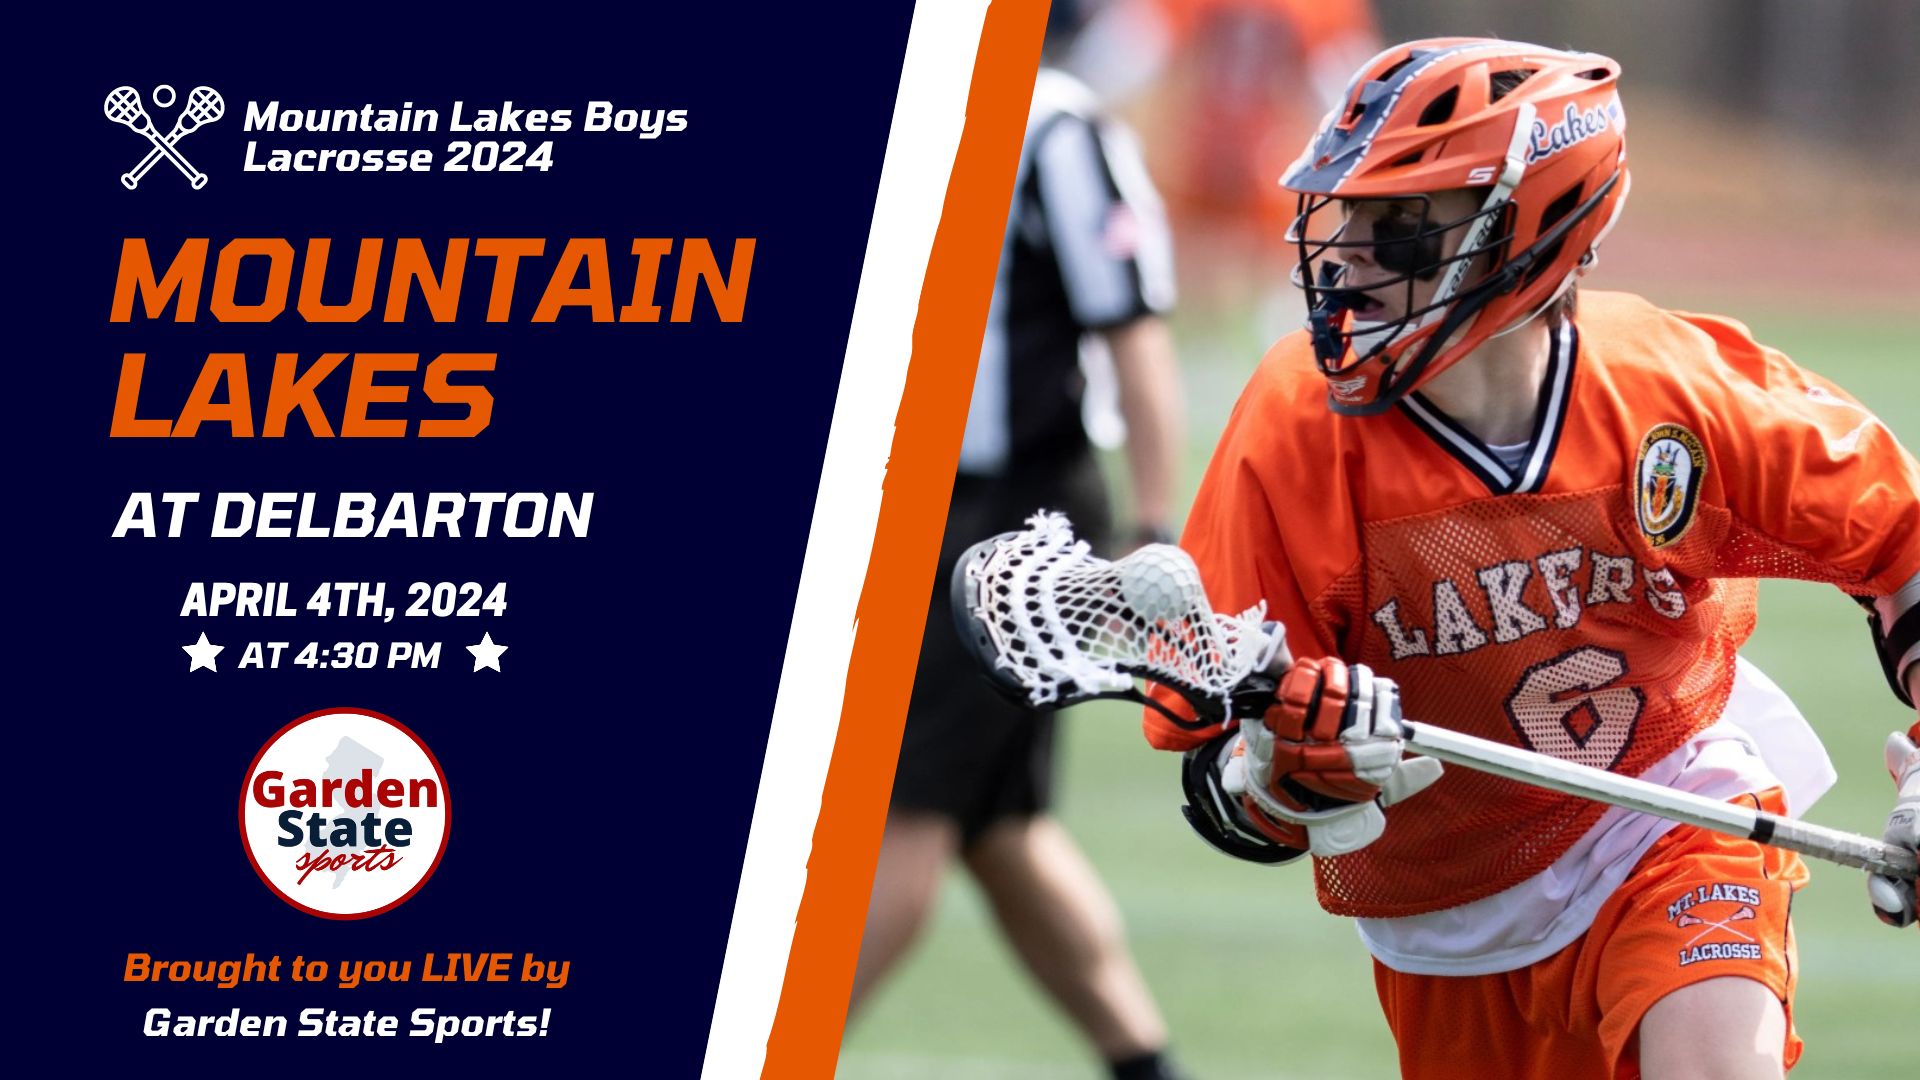 Events from May 18 – March 16 – Mountain Lakes Lacrosse Alumni Foundation